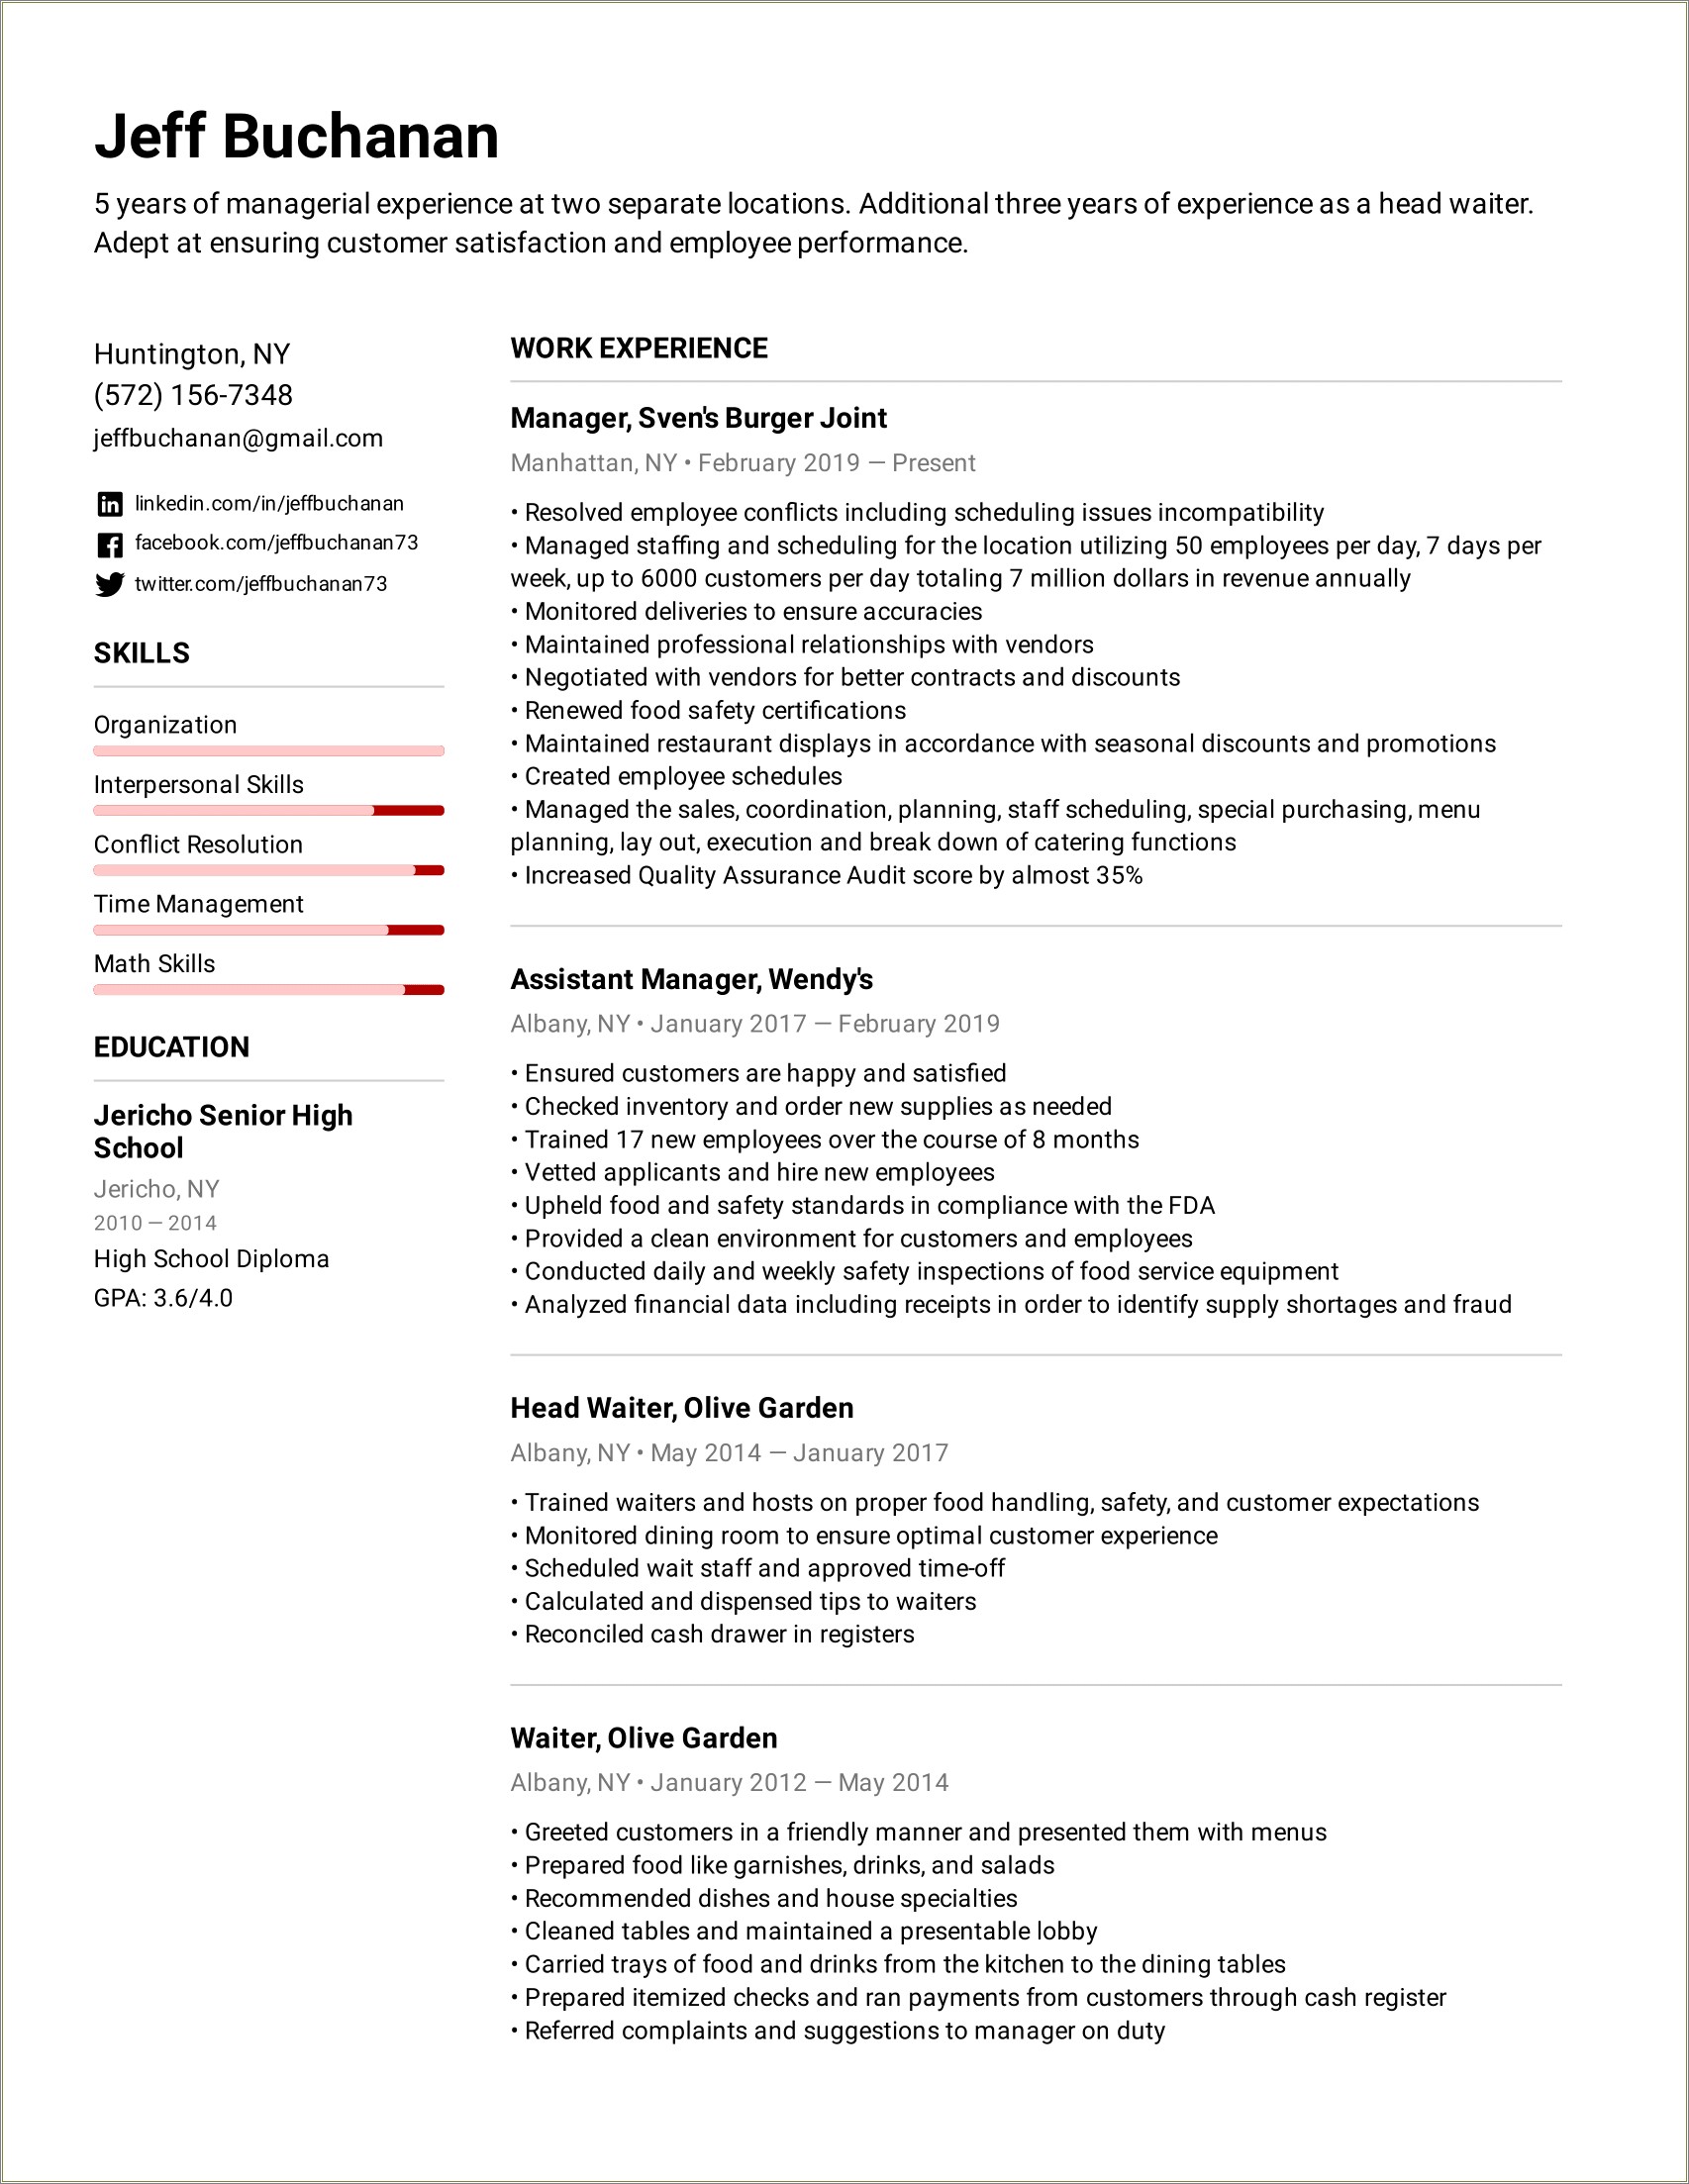 Resume Objective Statement For Gym Front Desk Employee